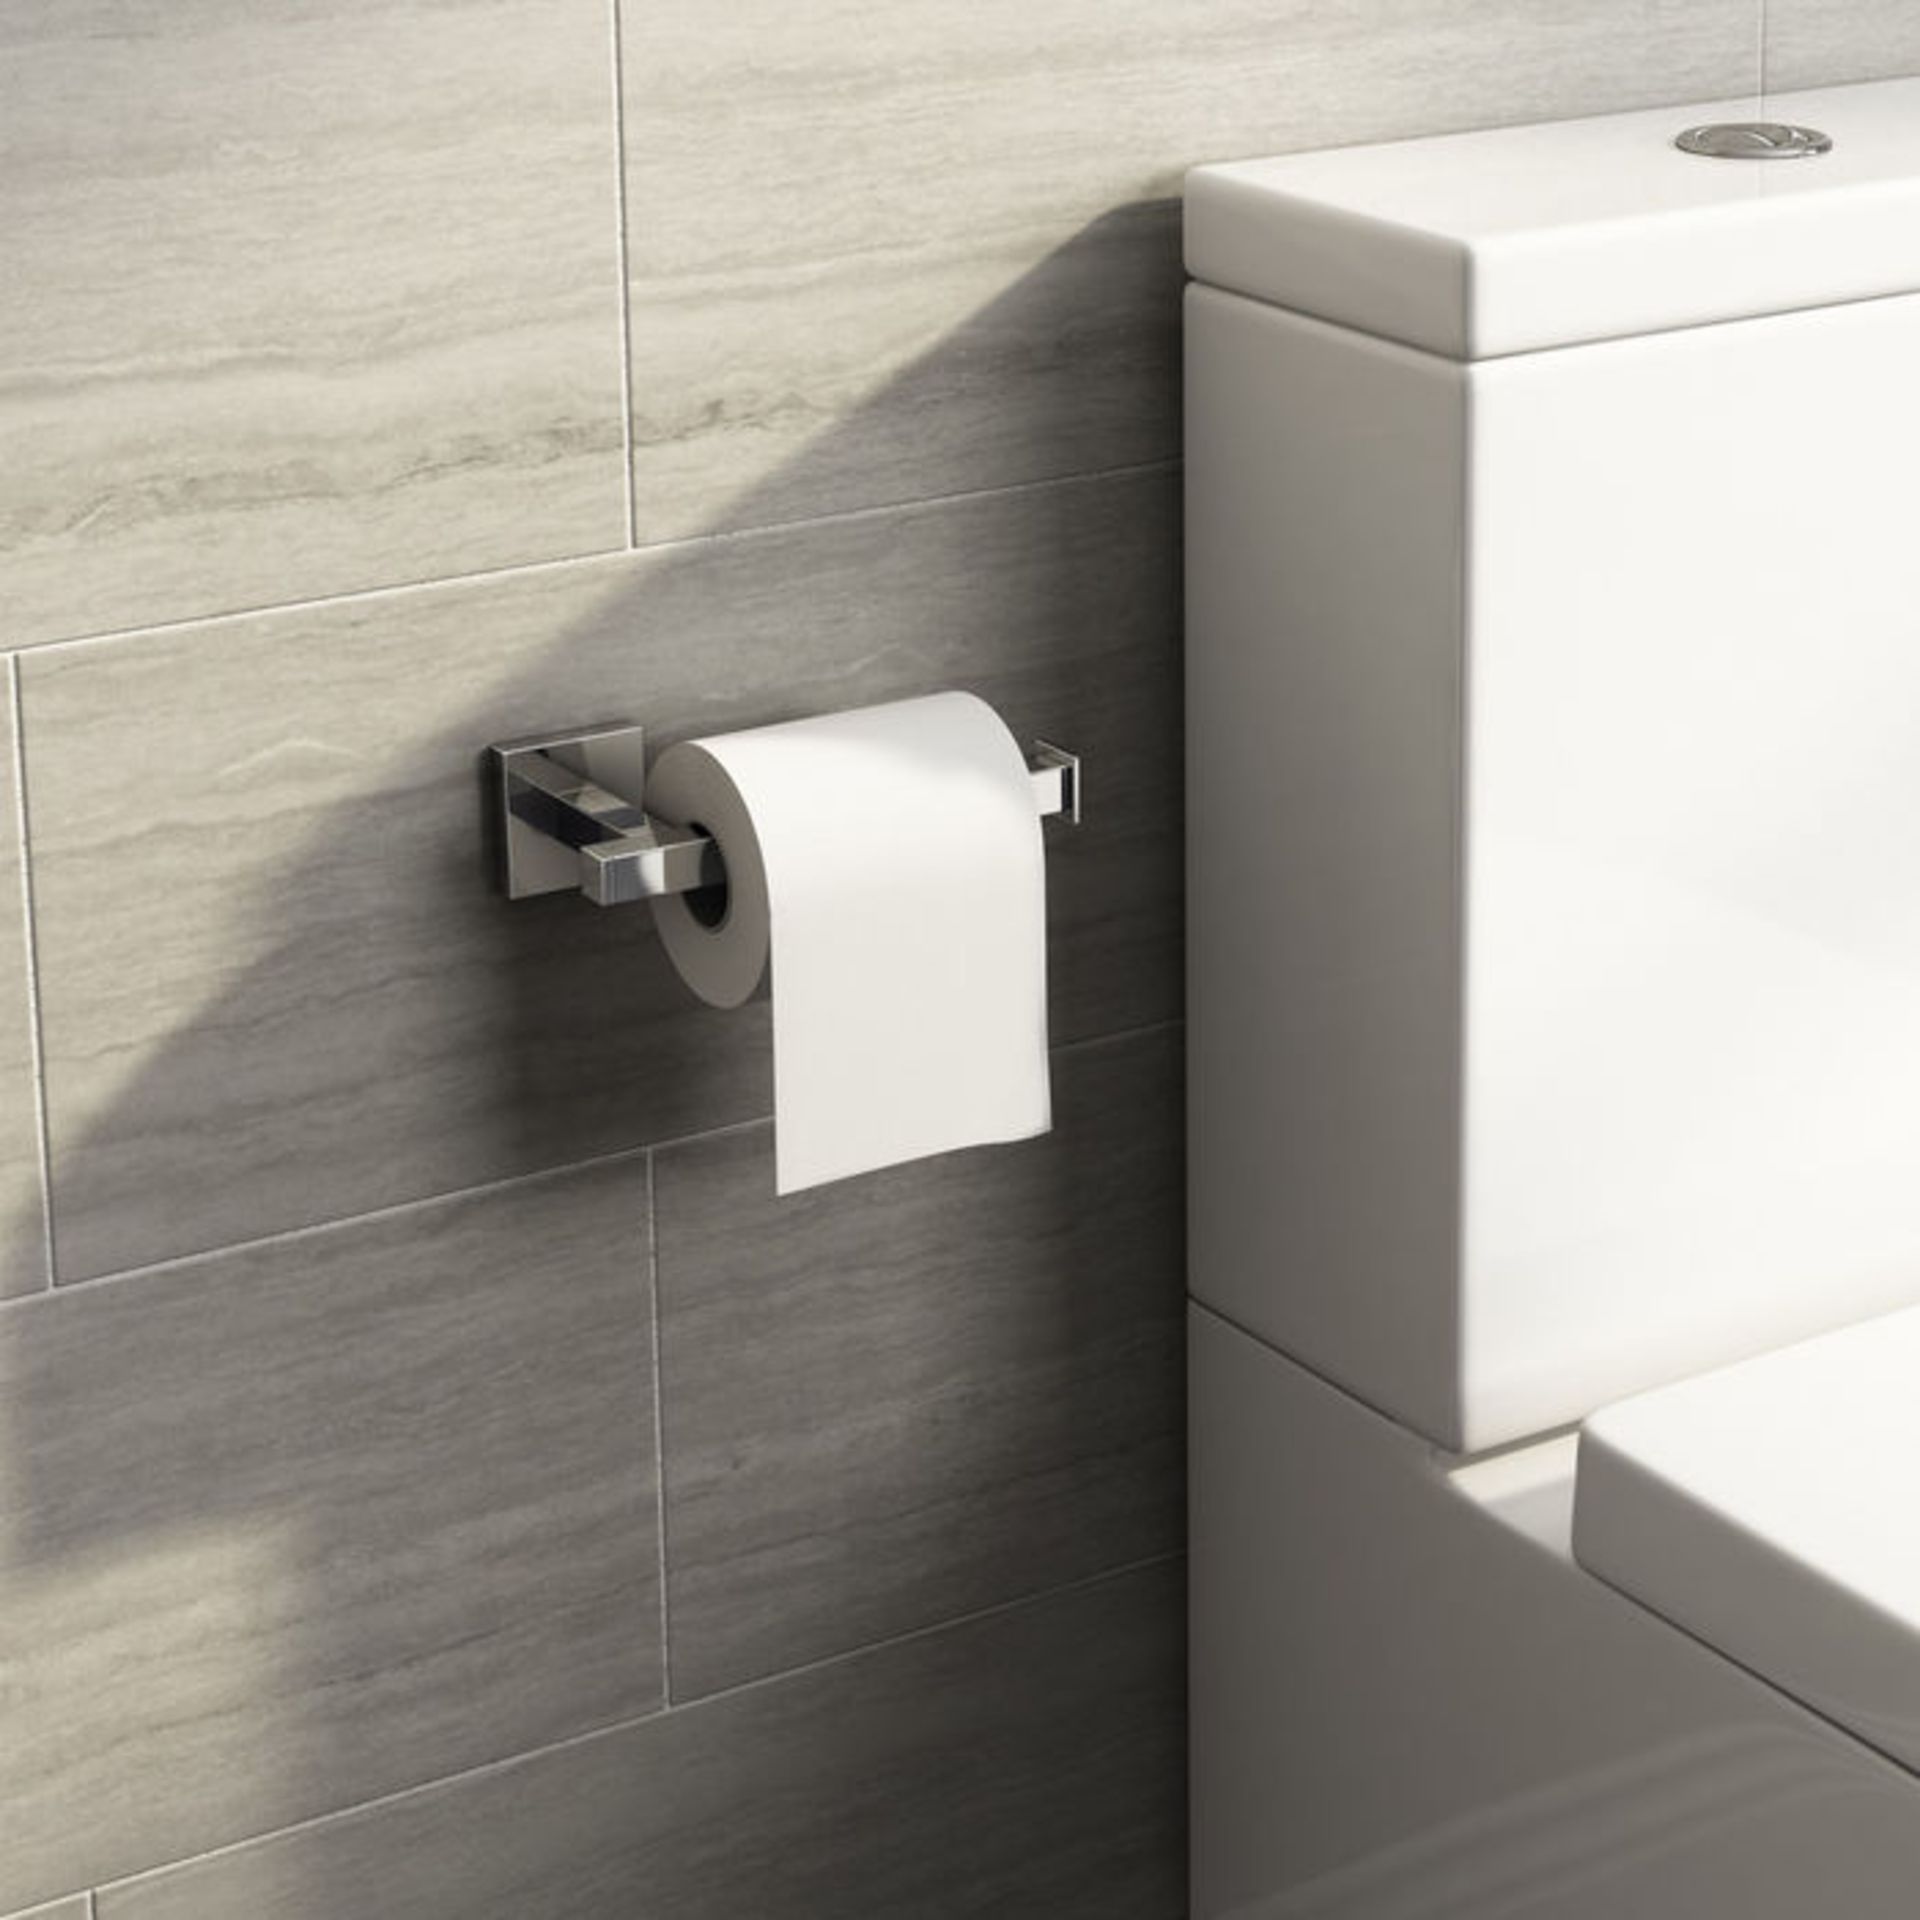 (PA32) Jesmond Toilet Roll Holder Finishes your bathroom with a little extra functionality and style - Image 2 of 3